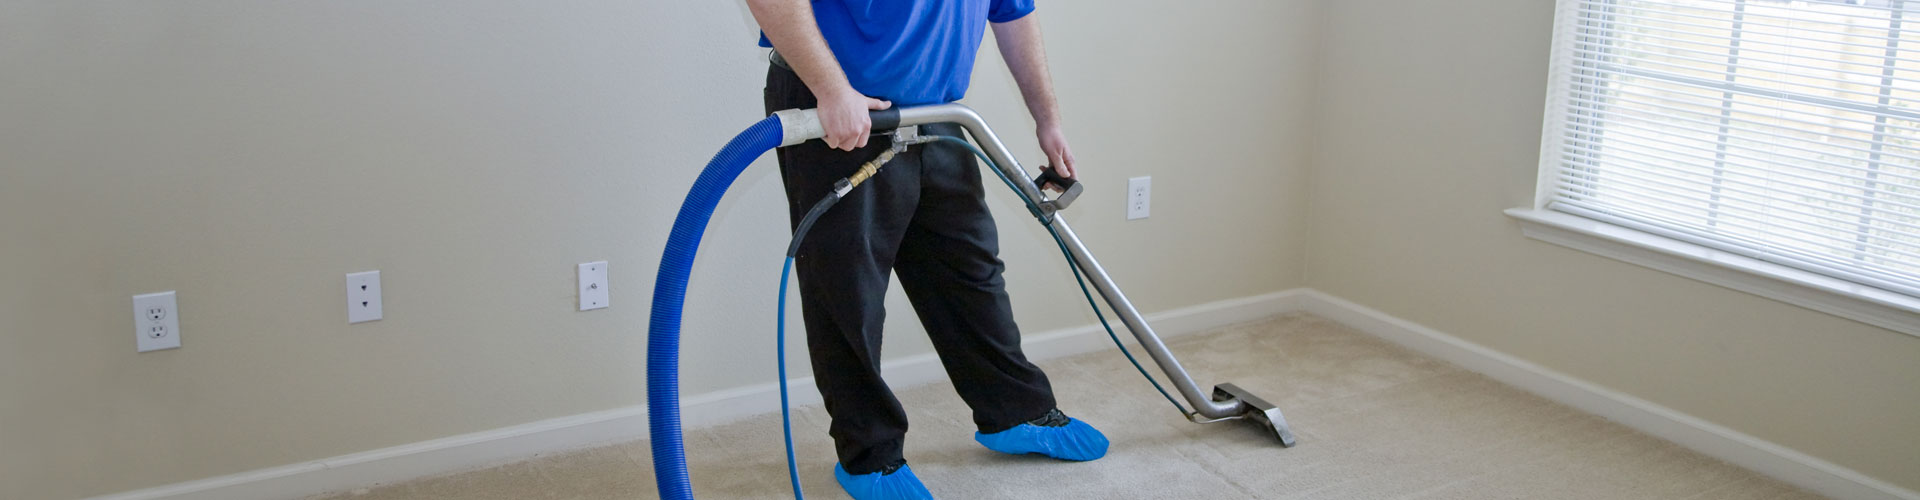 Worker Working on Carpet Cleaning